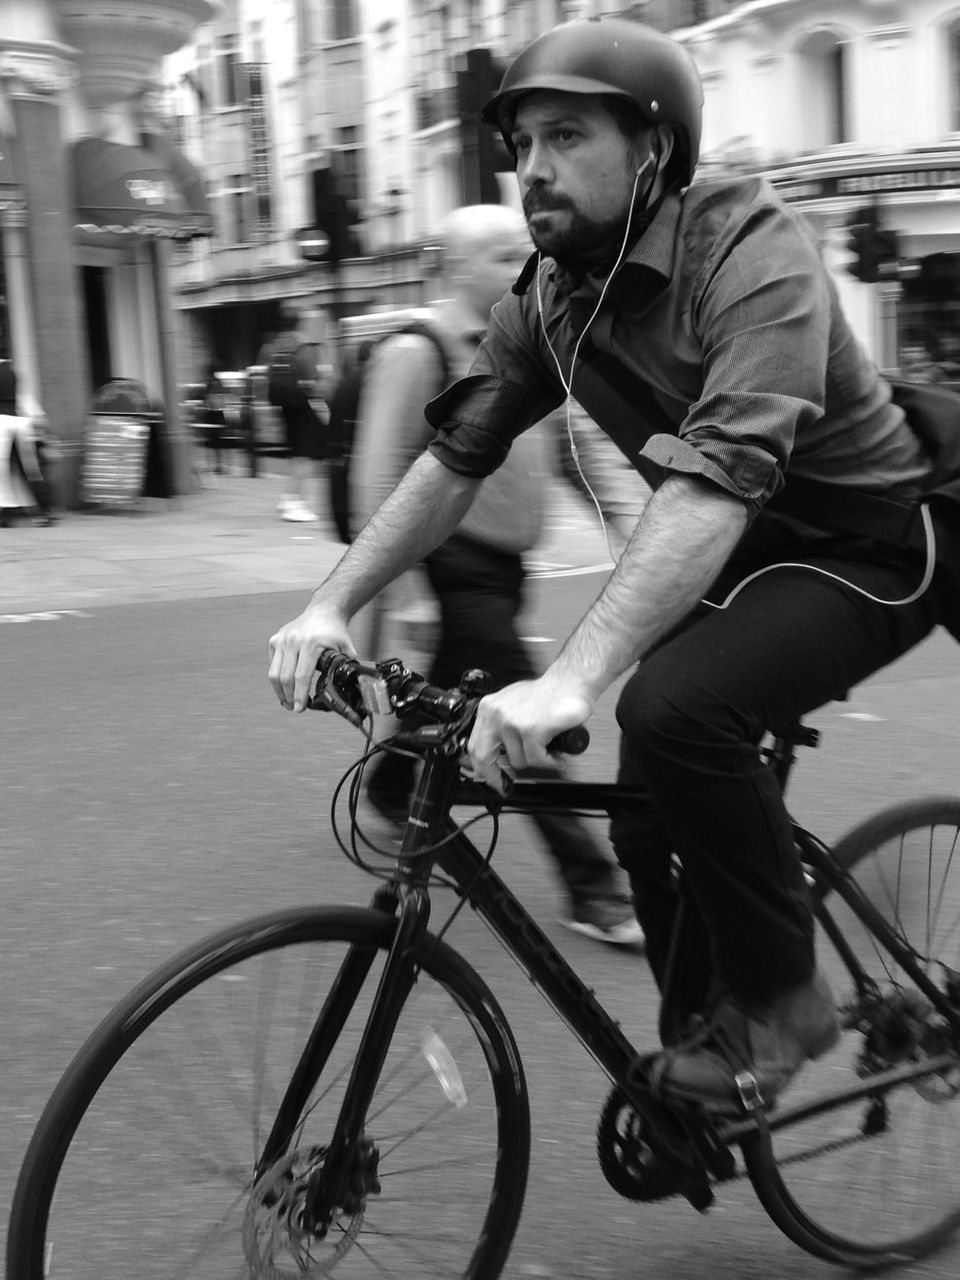 lifestyles, full length, leisure activity, casual clothing, bicycle, person, land vehicle, transportation, mode of transport, street, young adult, motion, childhood, riding, side view, boys, elementary age, front view